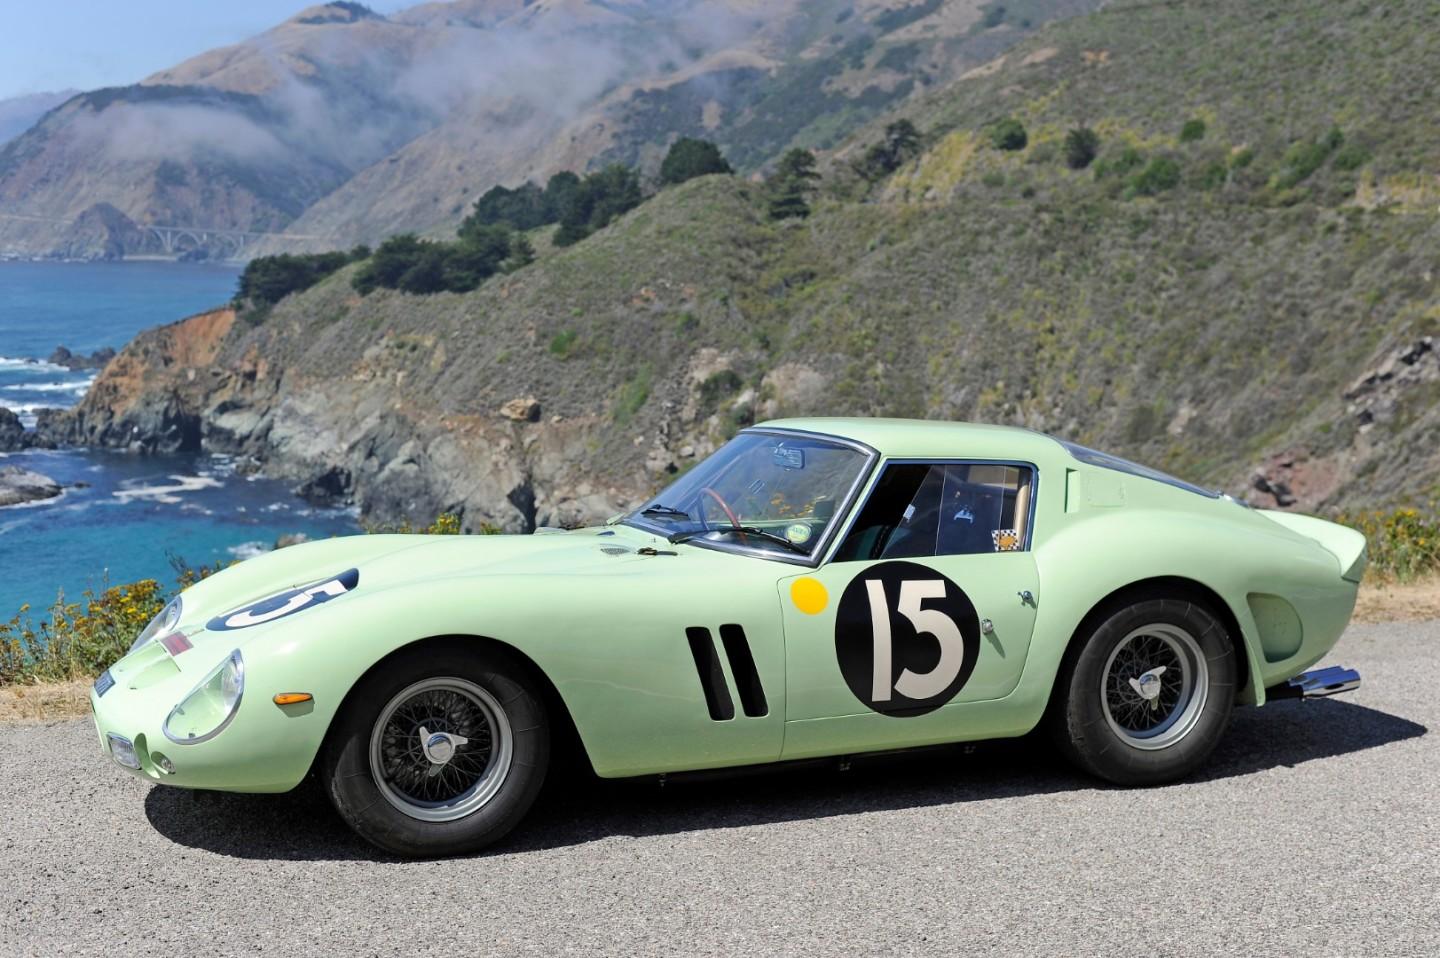 Craig McCaw (owner of this Ferrari light green 250 GTO #3505GT) was one of America's mobile phone pioneers who saw the future and moved faster than the incumbent telcos to develop the networks and mobile services the public wanted.